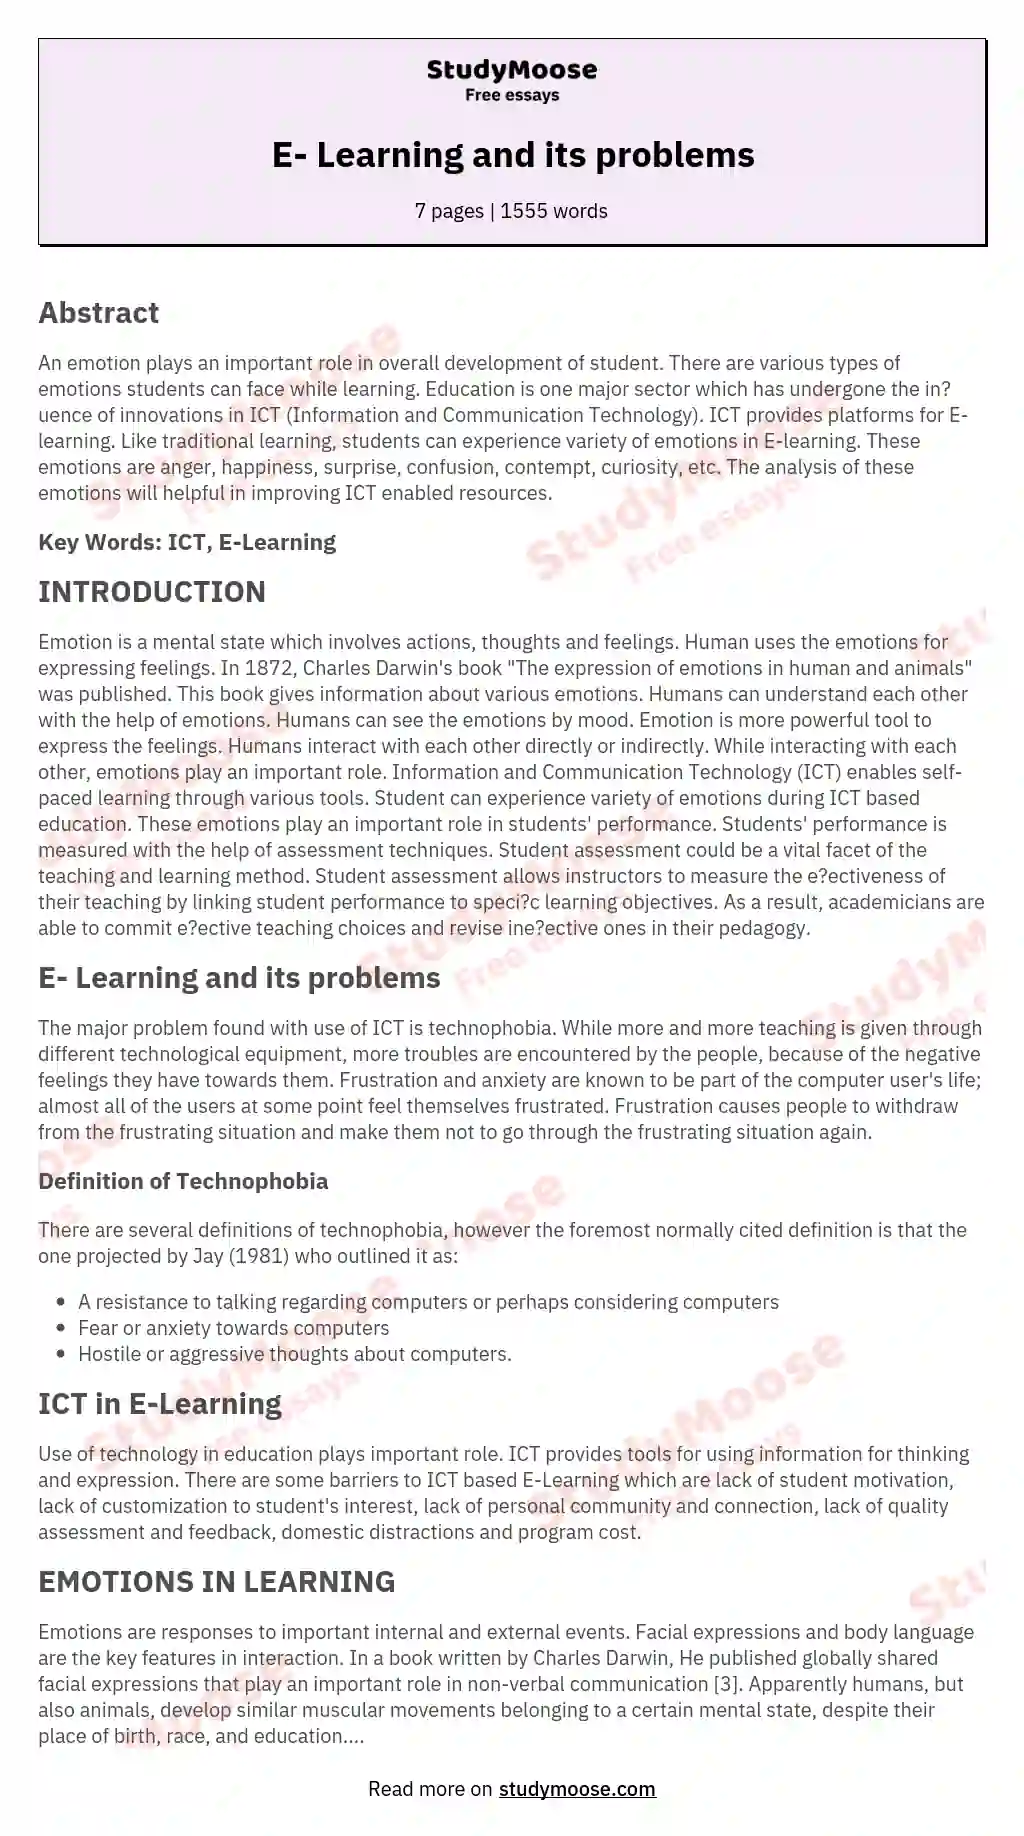 E- Learning and its problems essay